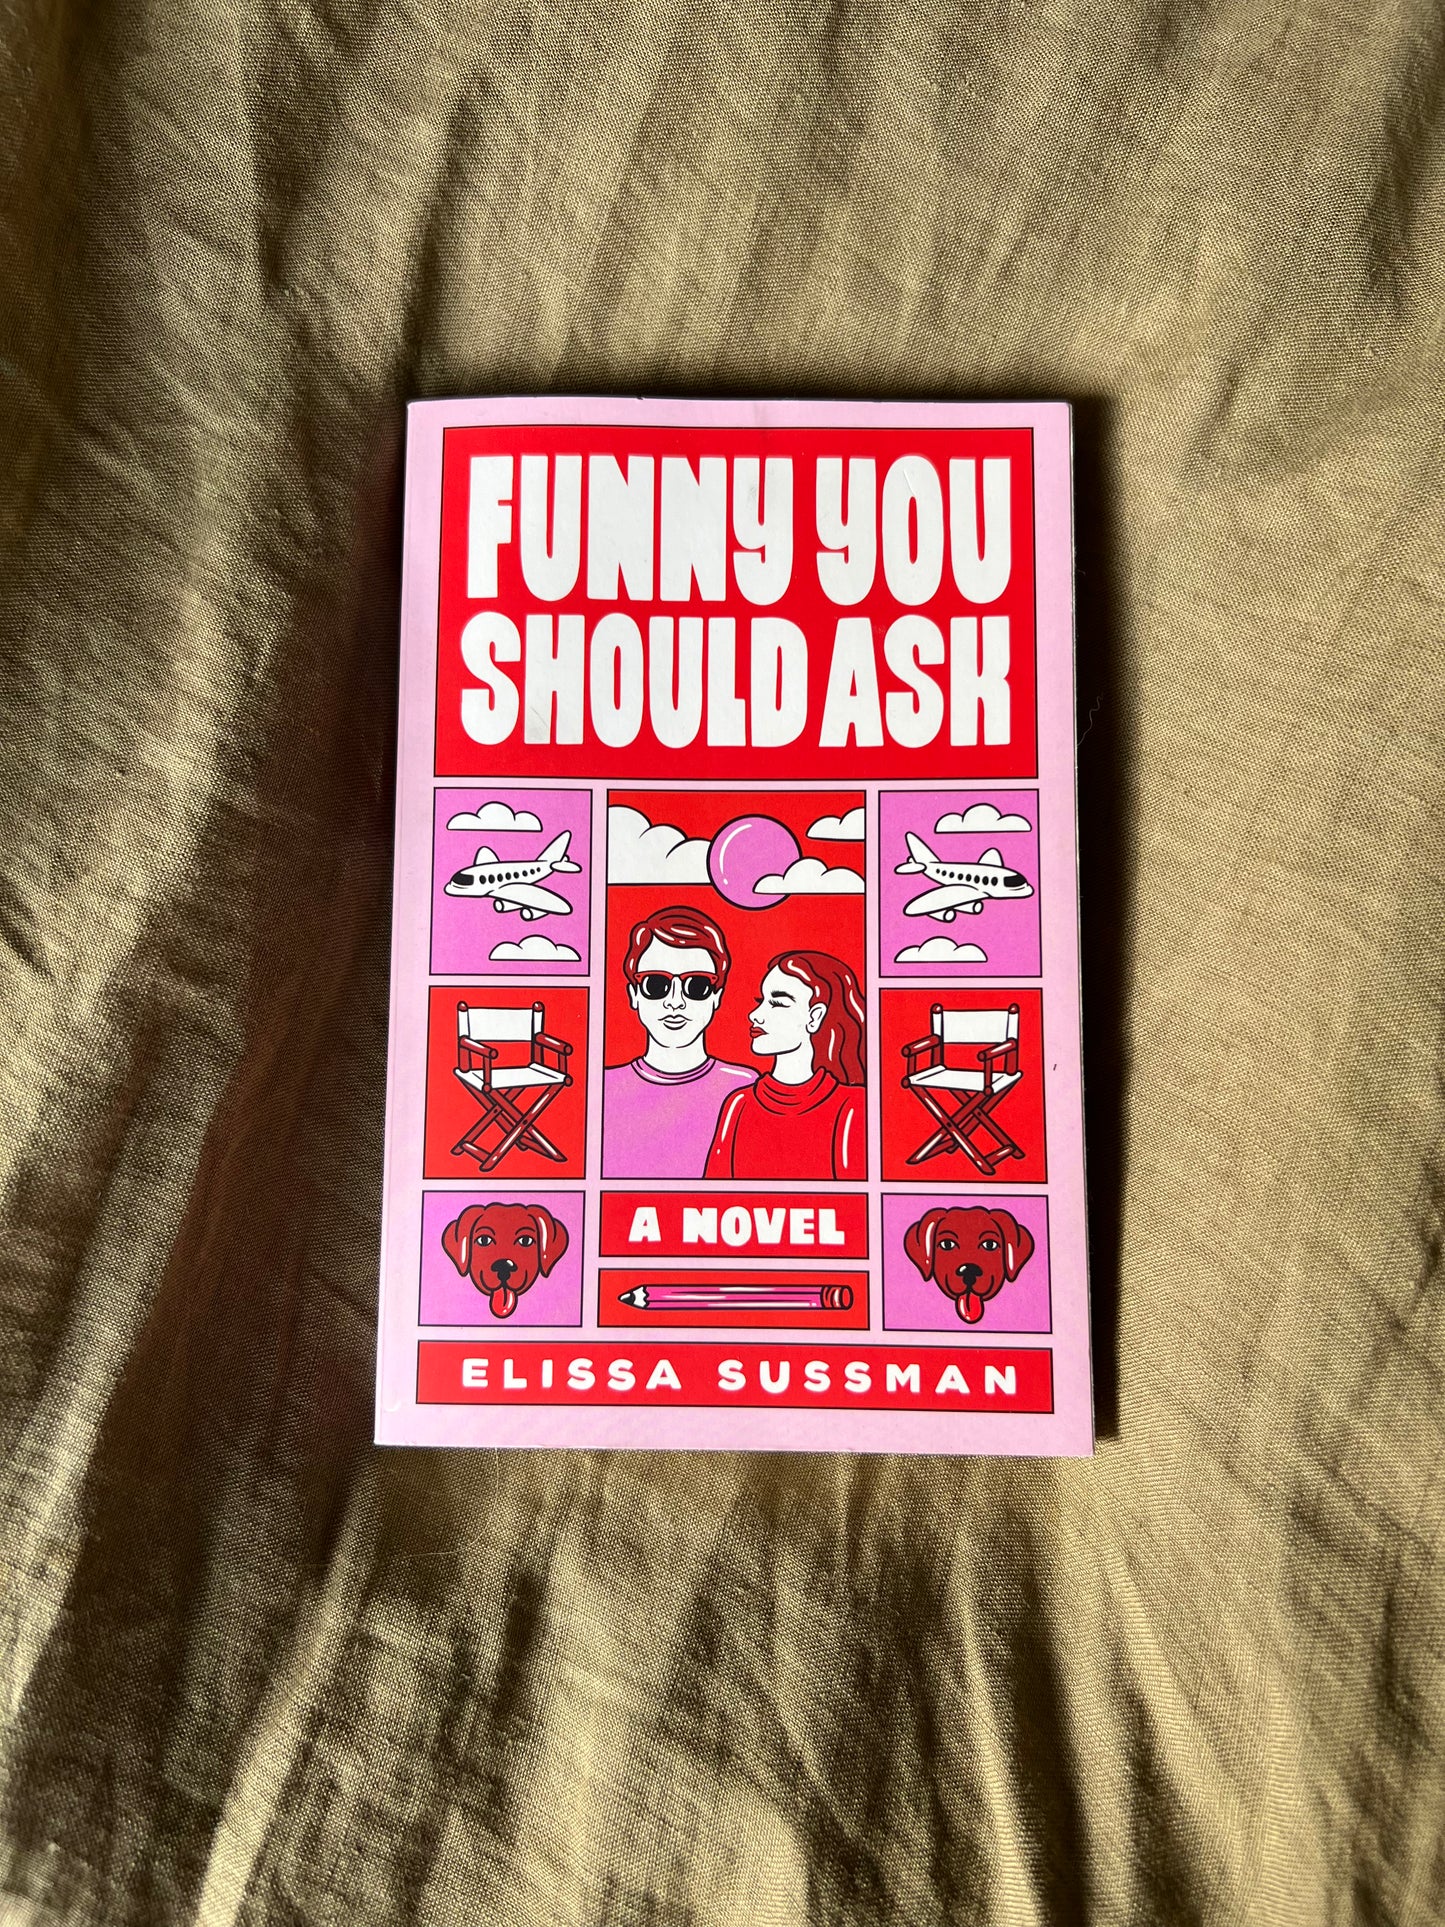 funny you should ask by elissa sussman